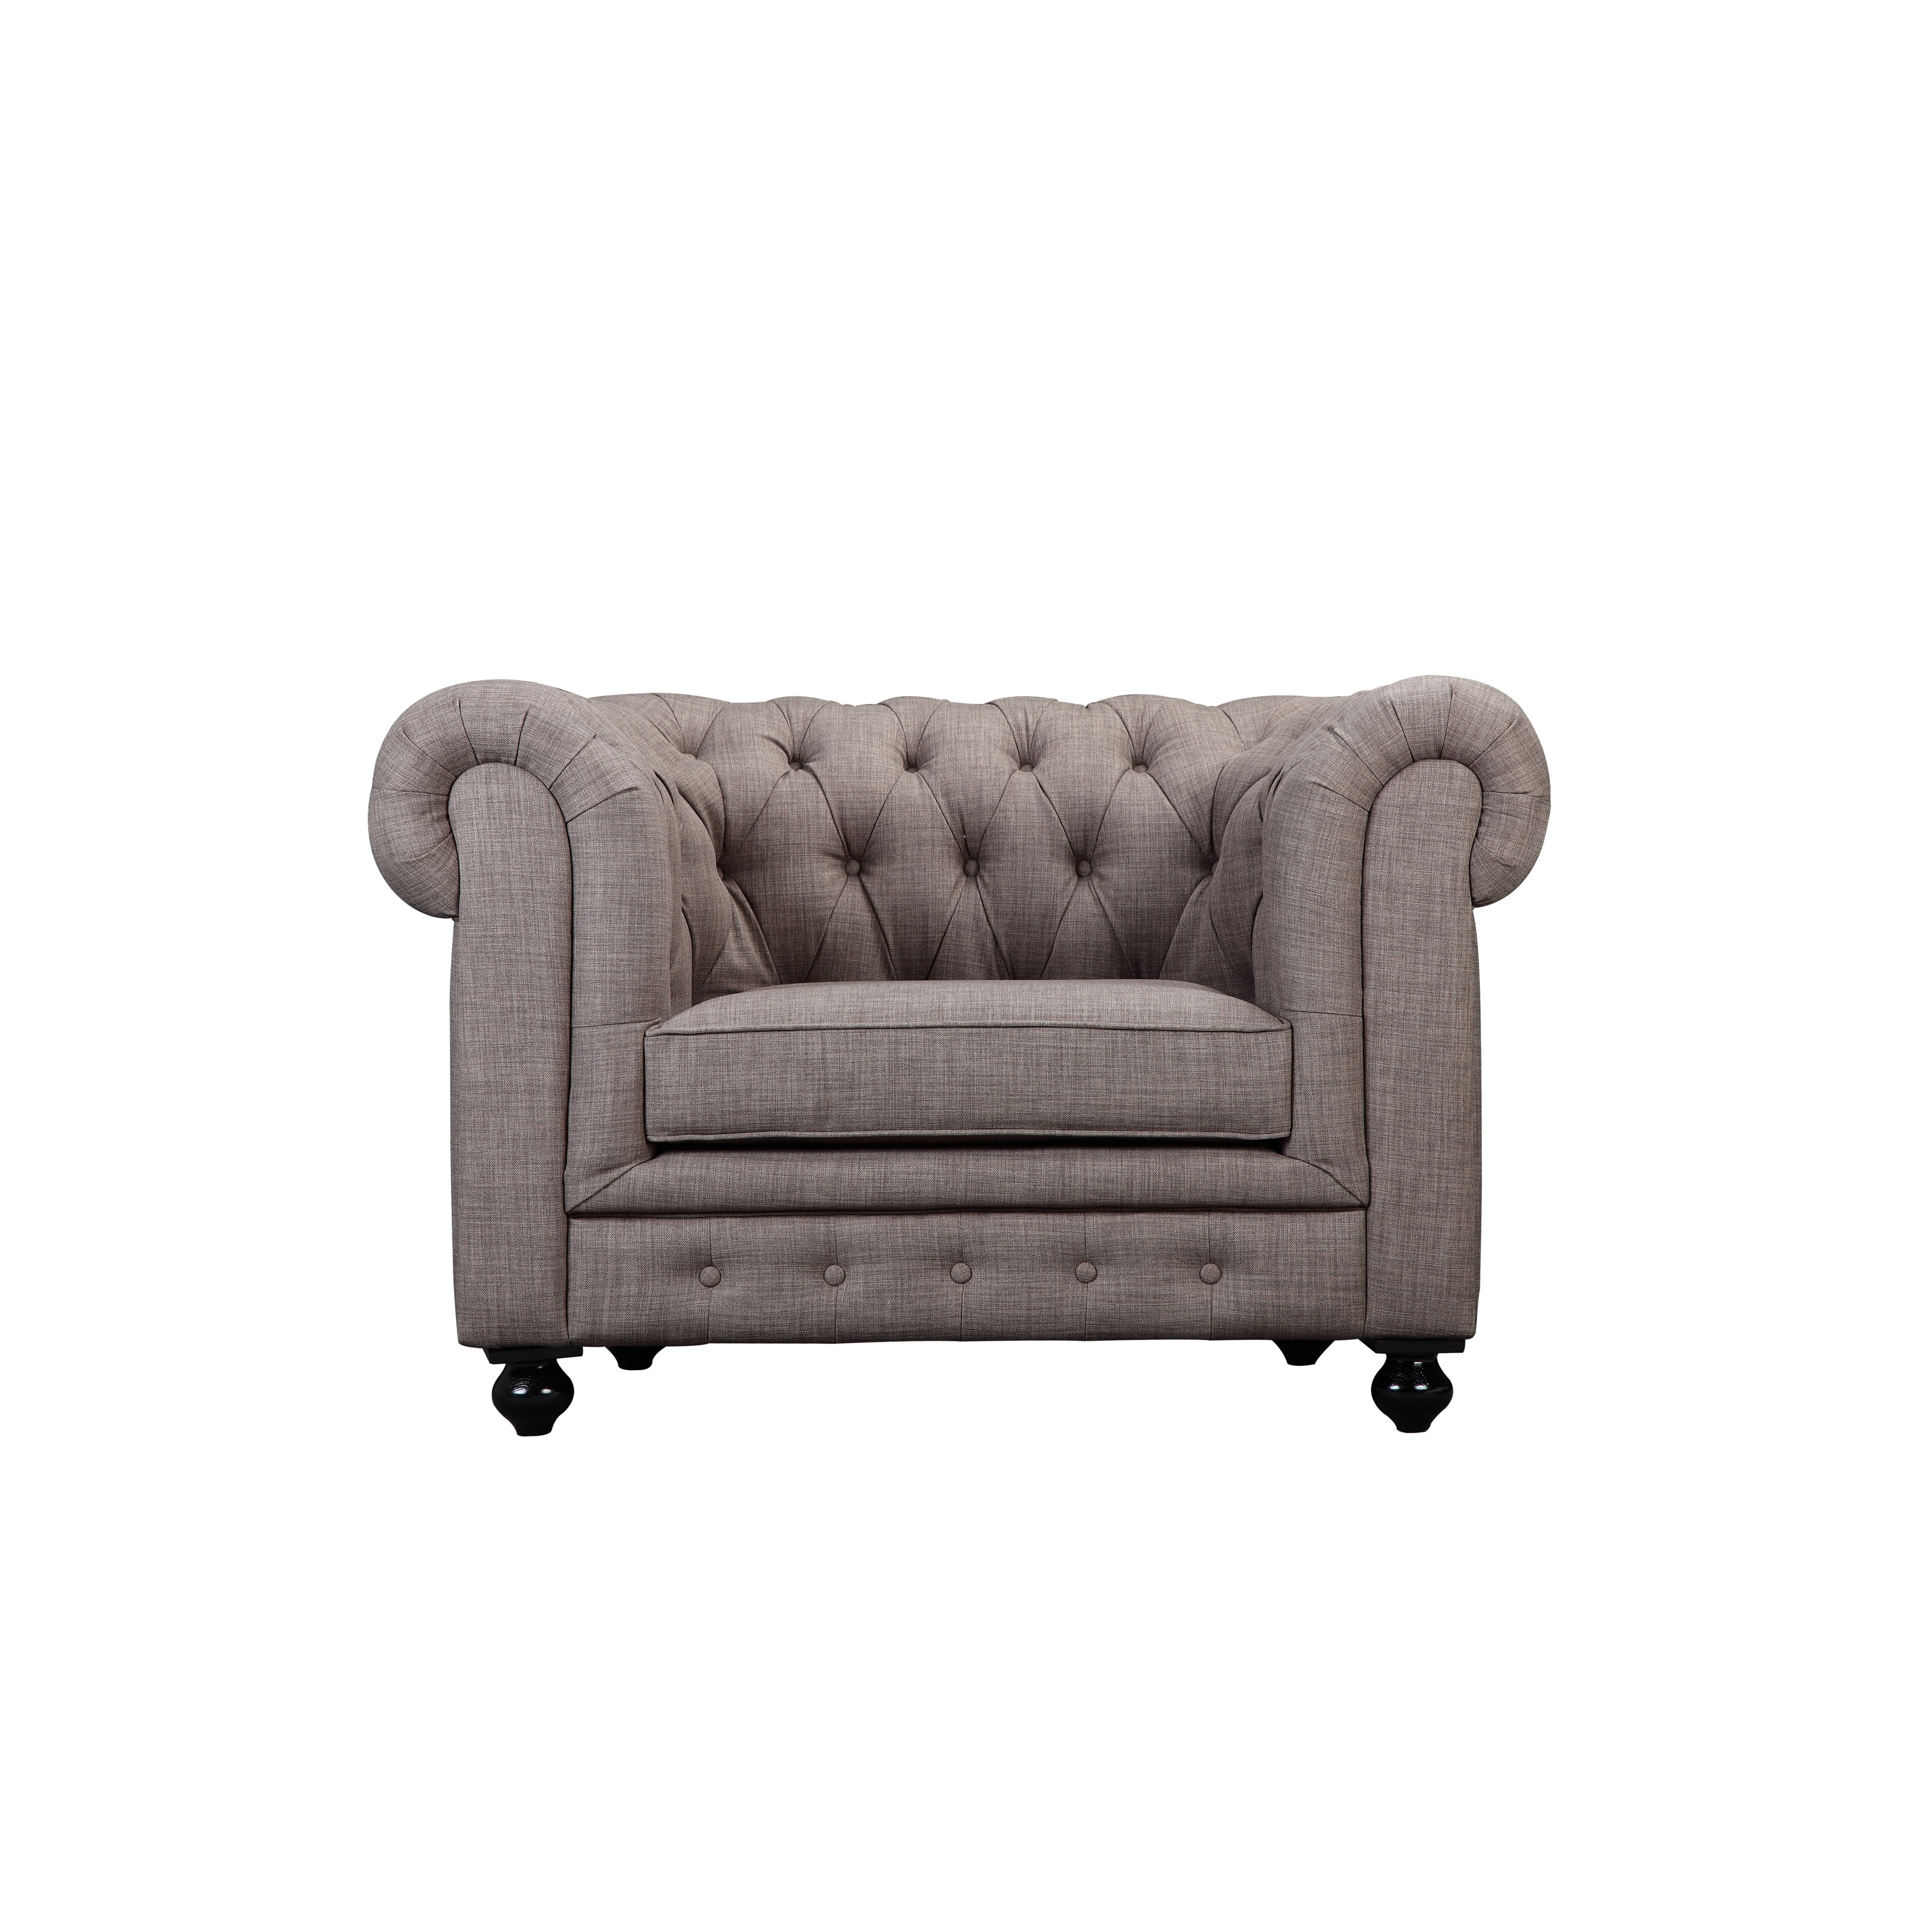 Chester 1 Seater Sofa Chair 